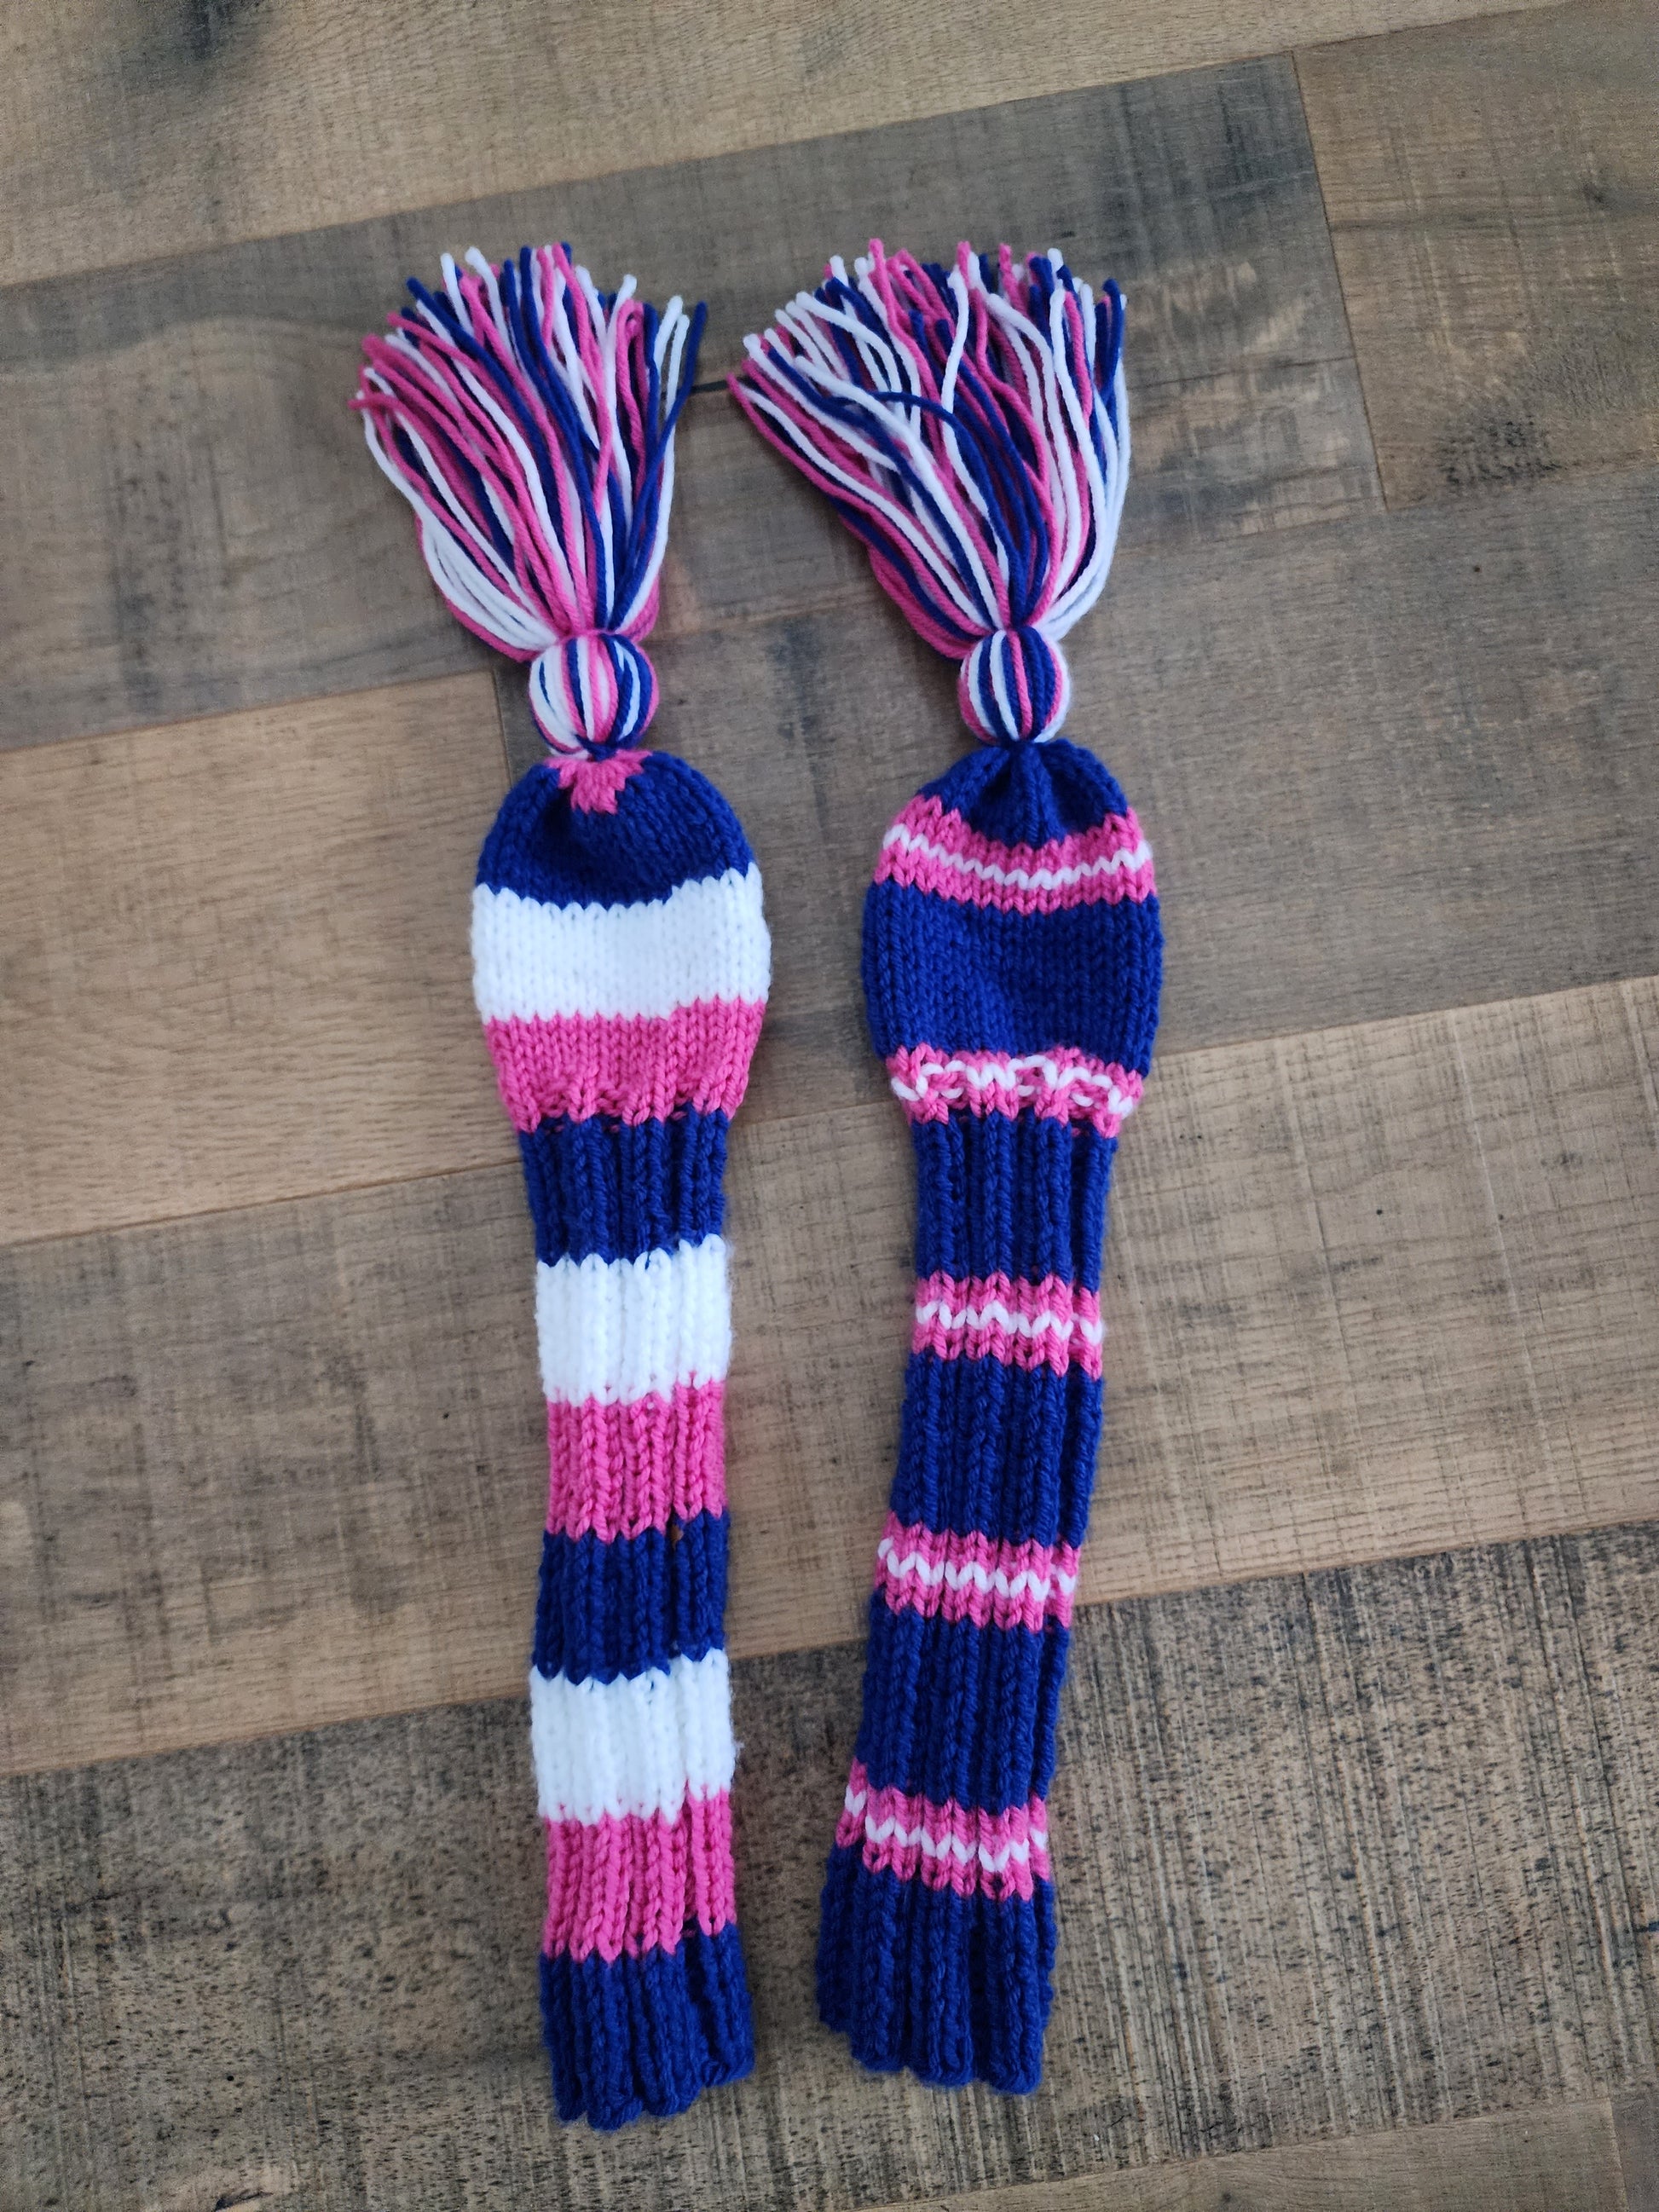 Two Golf Club Head Covers Retro-Vintage Pink, Blue & White with Tassels for Fairway Woods - Austinknittylimits